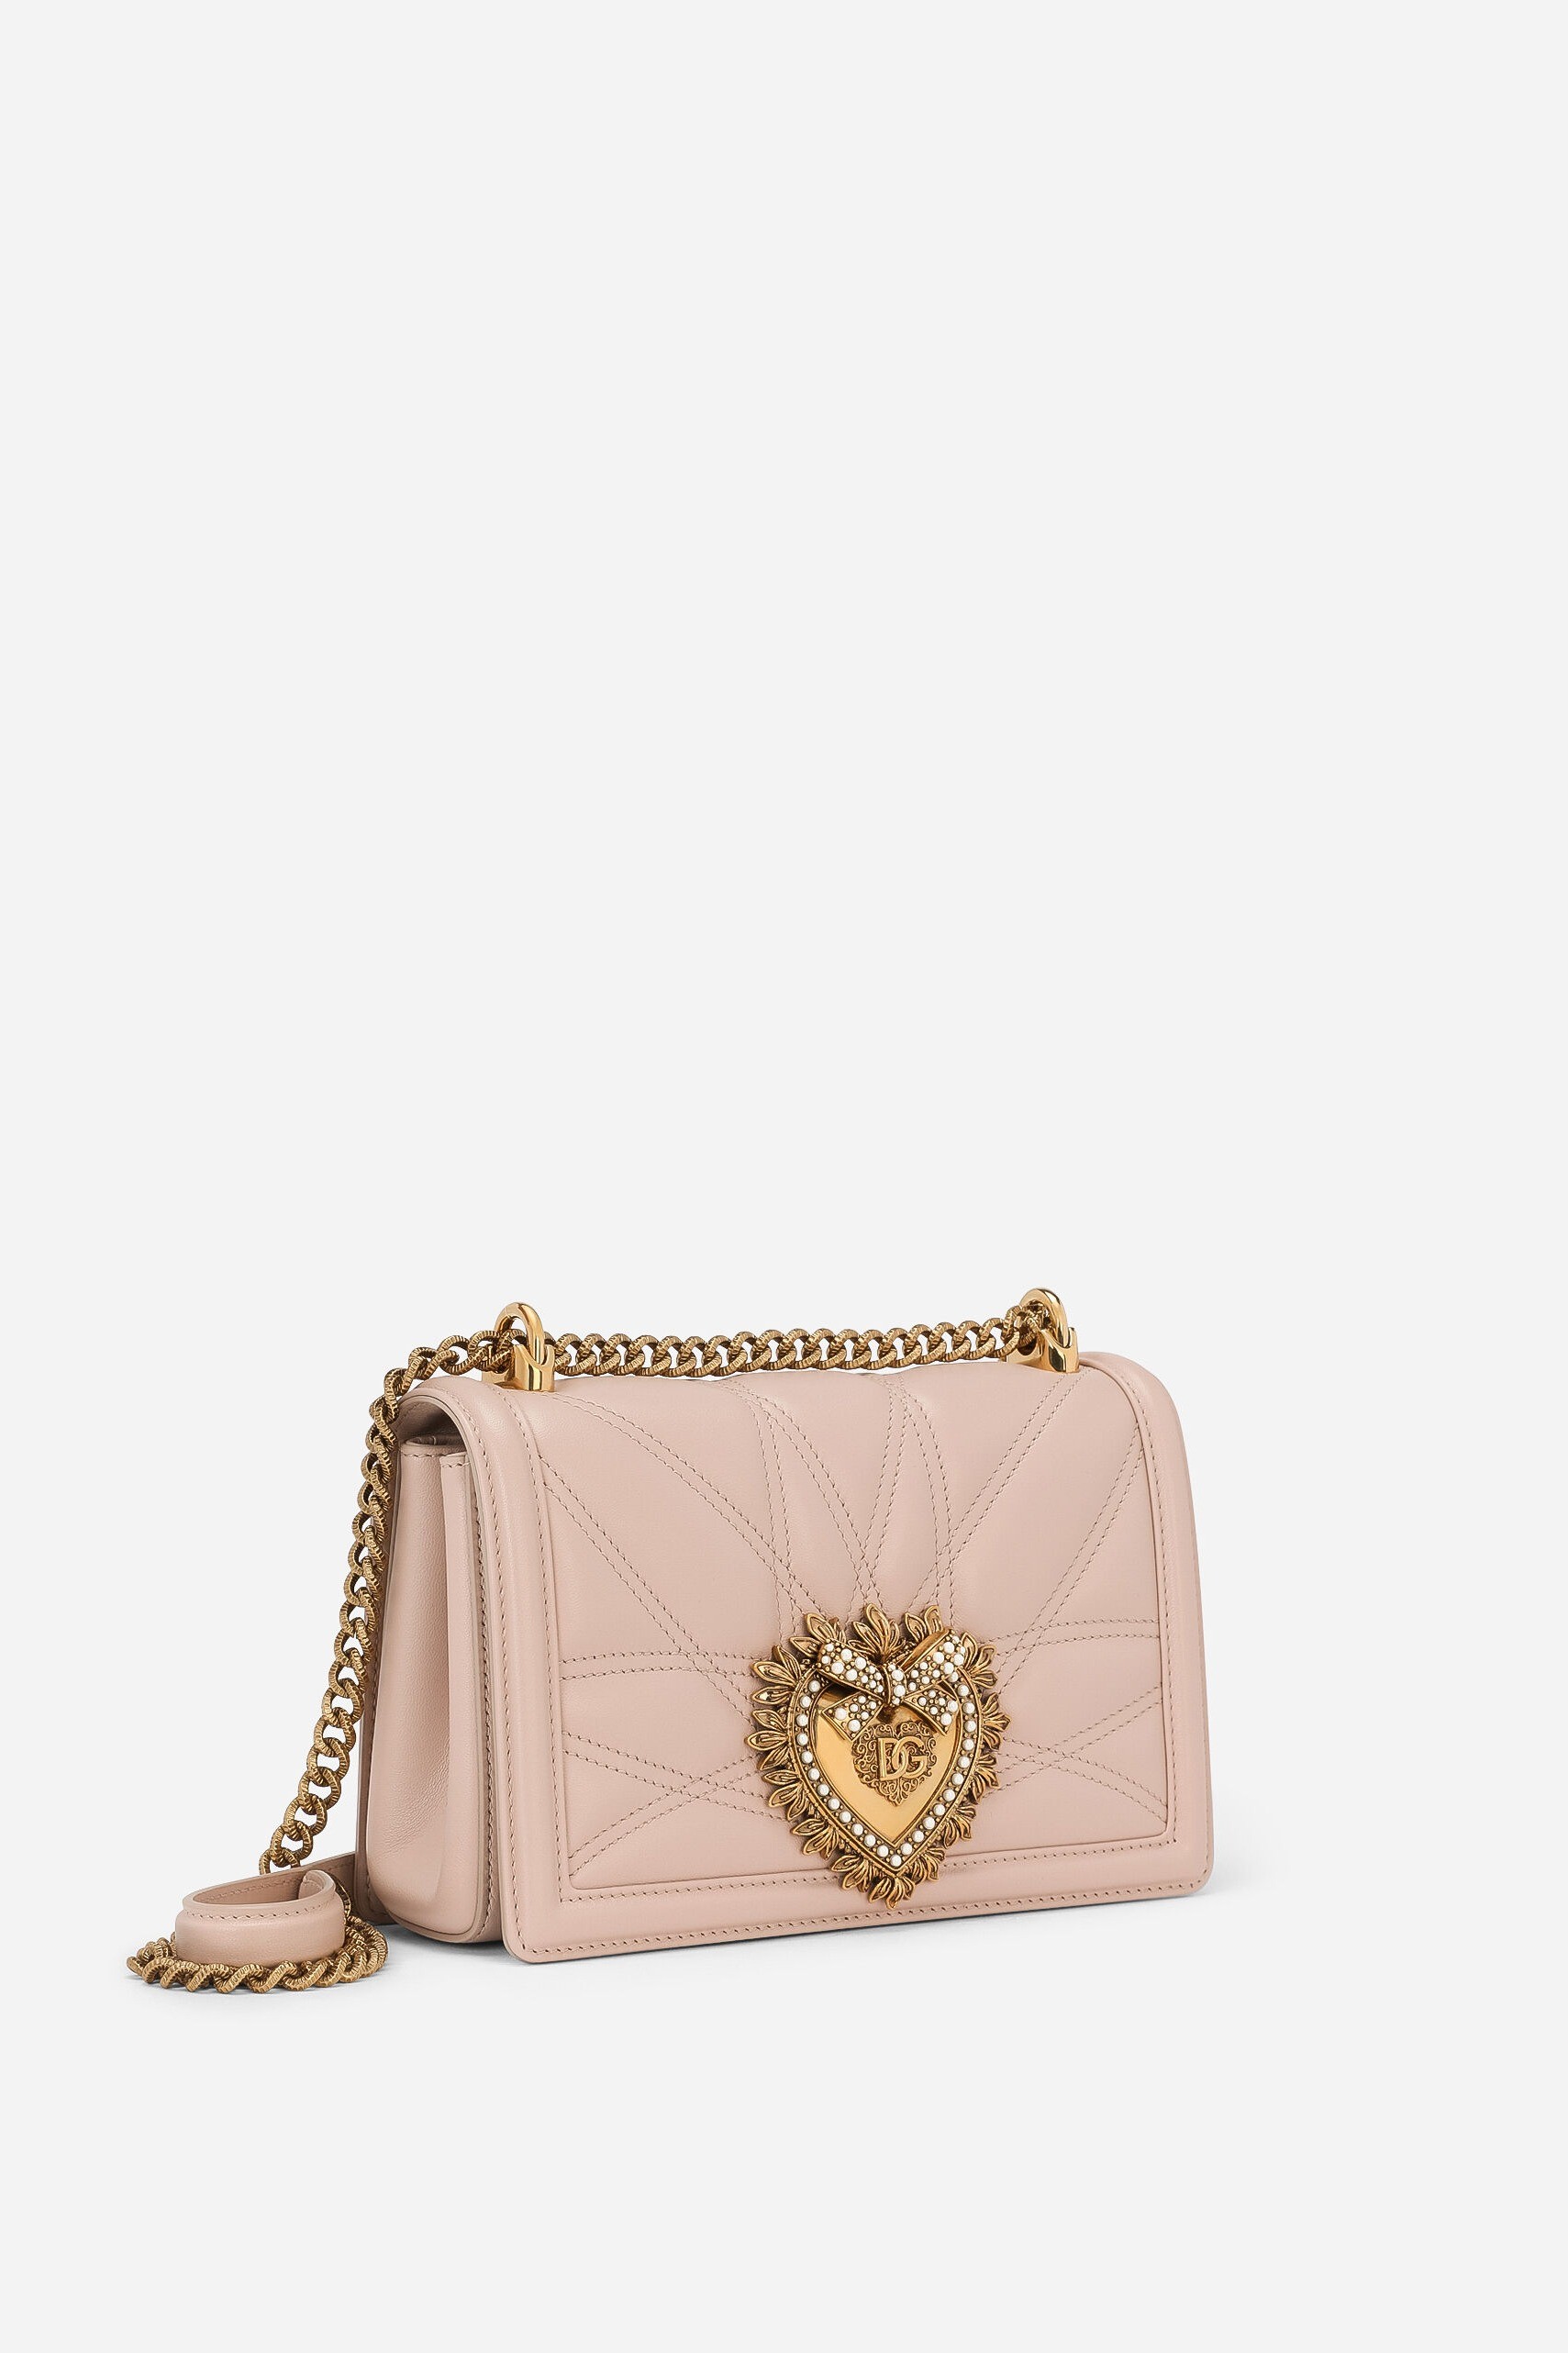 MEDIUM DEVOTION BAG IN QUILTED NAPPA LEATHER - Pale Pink